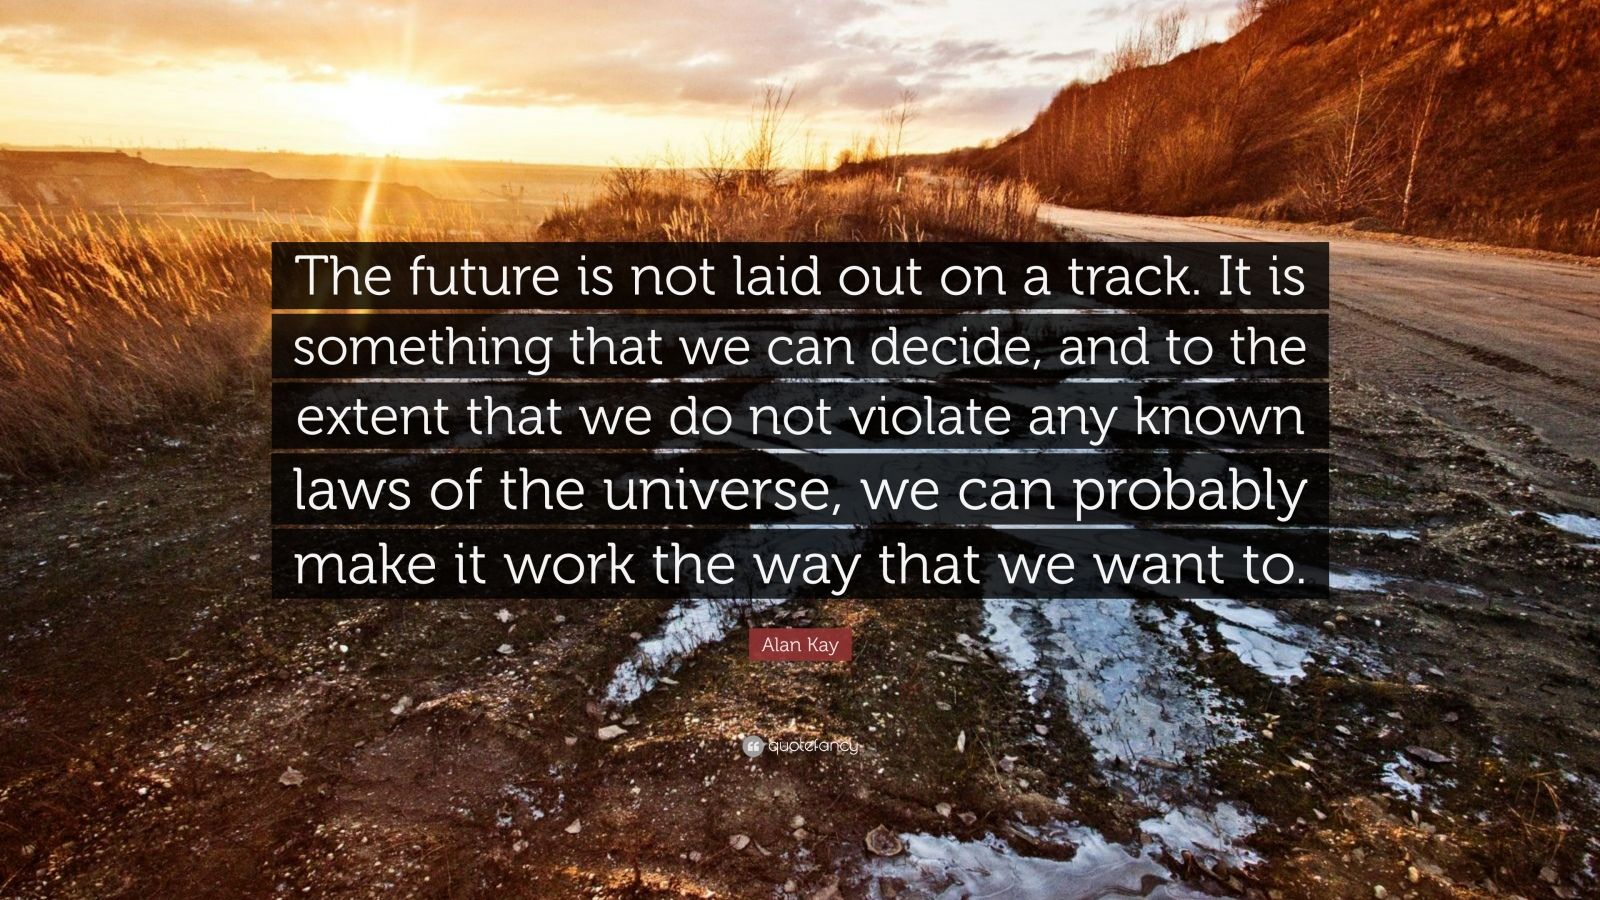 Alan Kay Quote: “The future is not laid out on a track. It is something ...